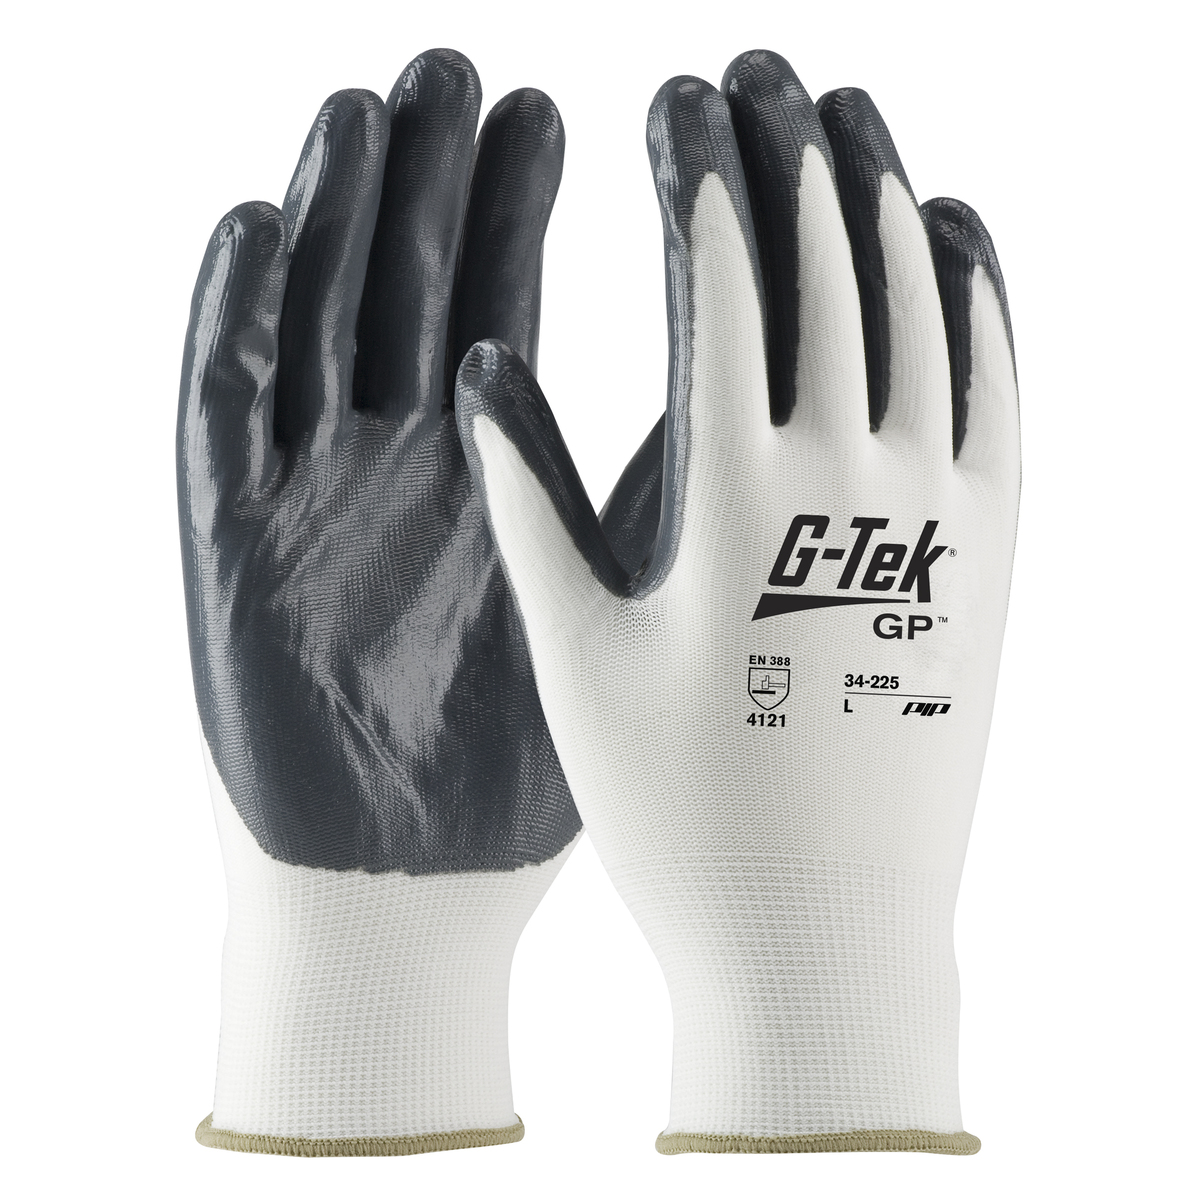 PIP® Medium G-Tek® 13 Gauge Gray Nitrile Palm And Finger Coated Work Gloves With Nylon Liner And Continuous Knit Wrist